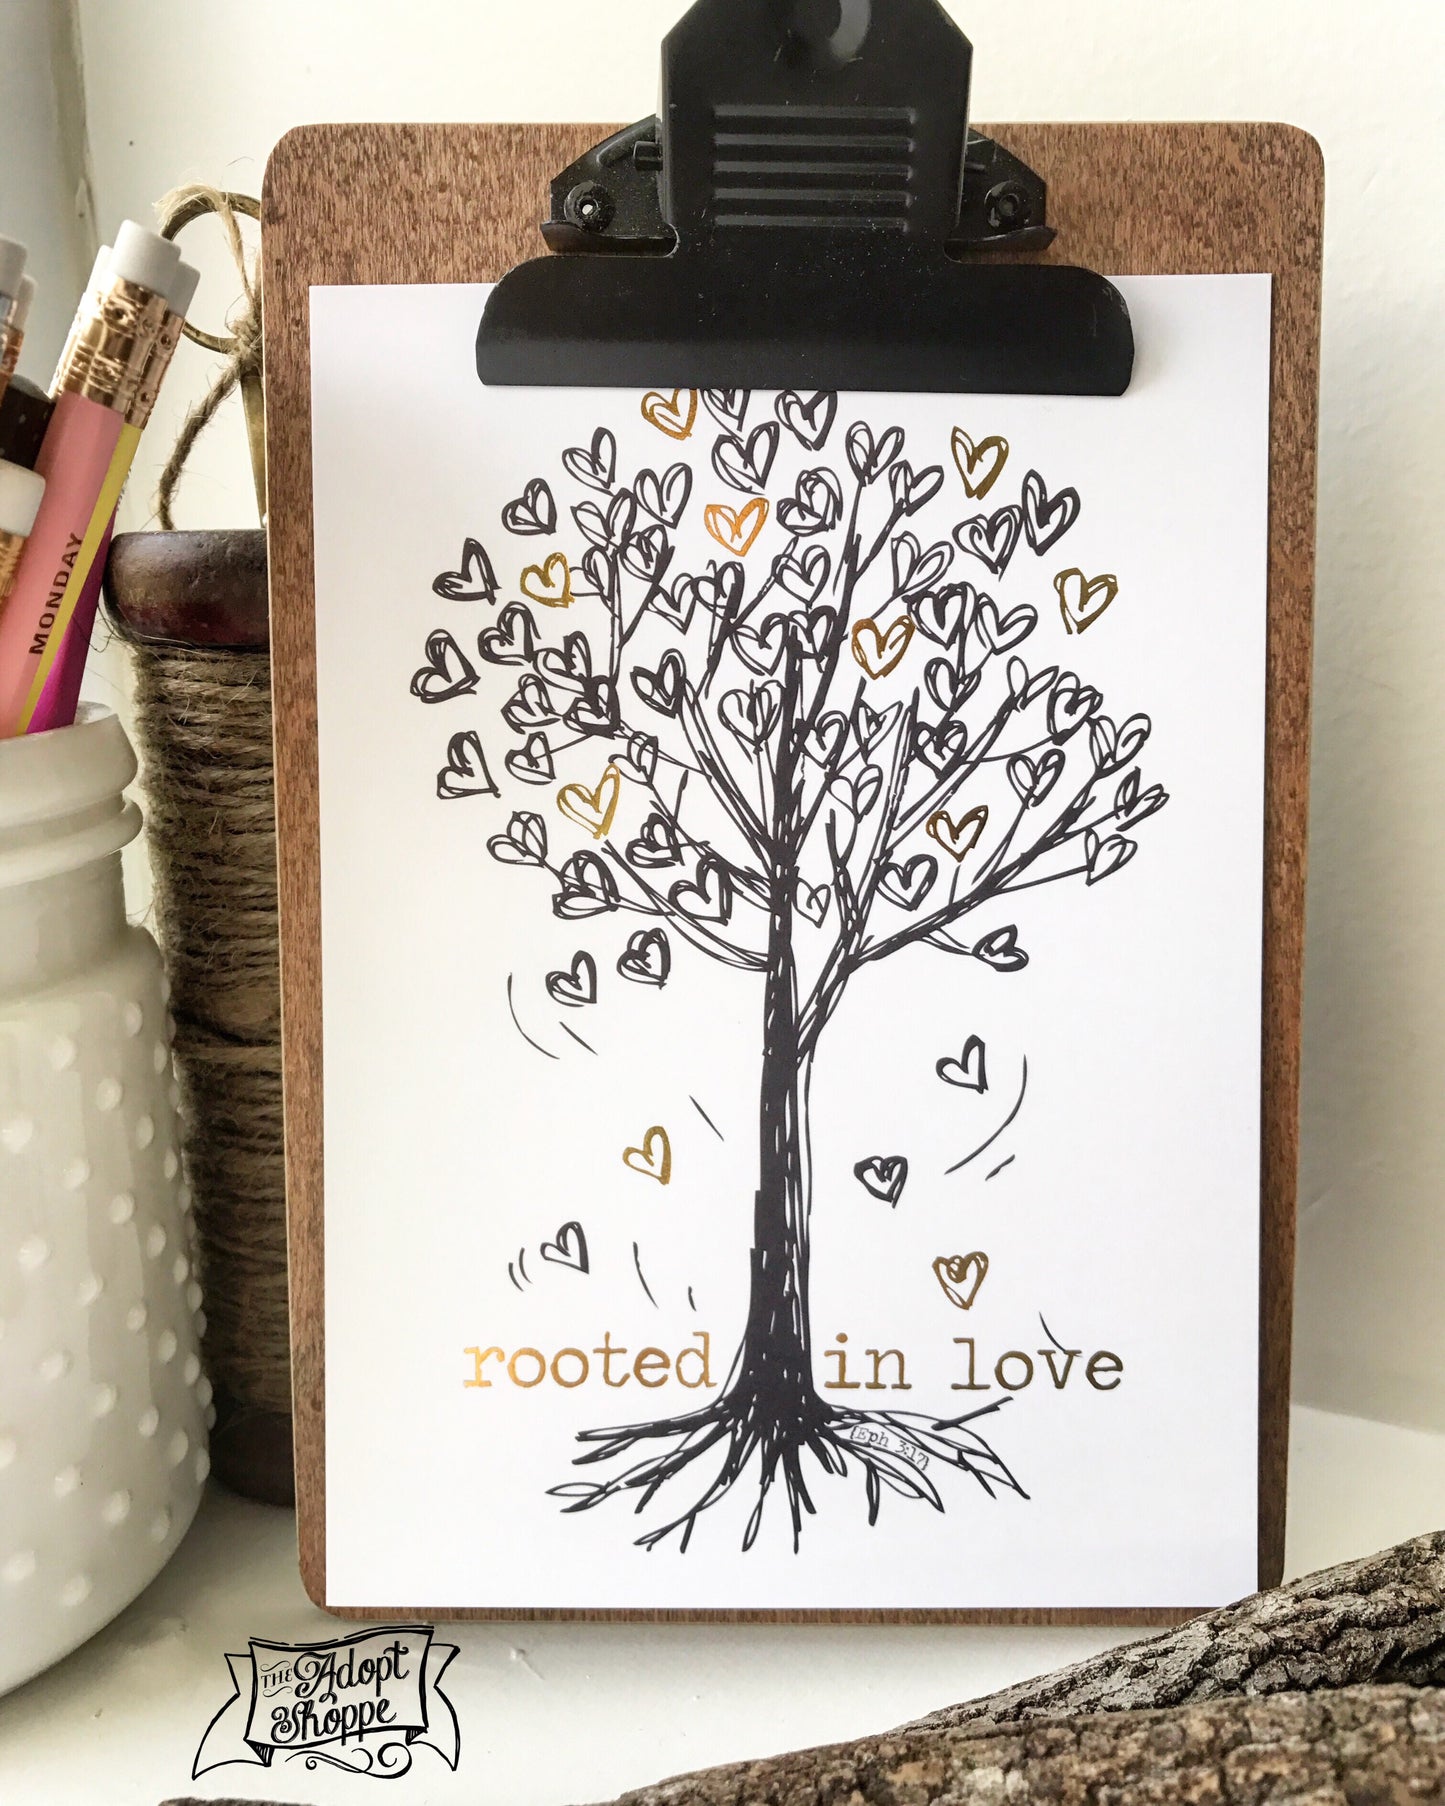 rooted in love gold foil 5"x7" print